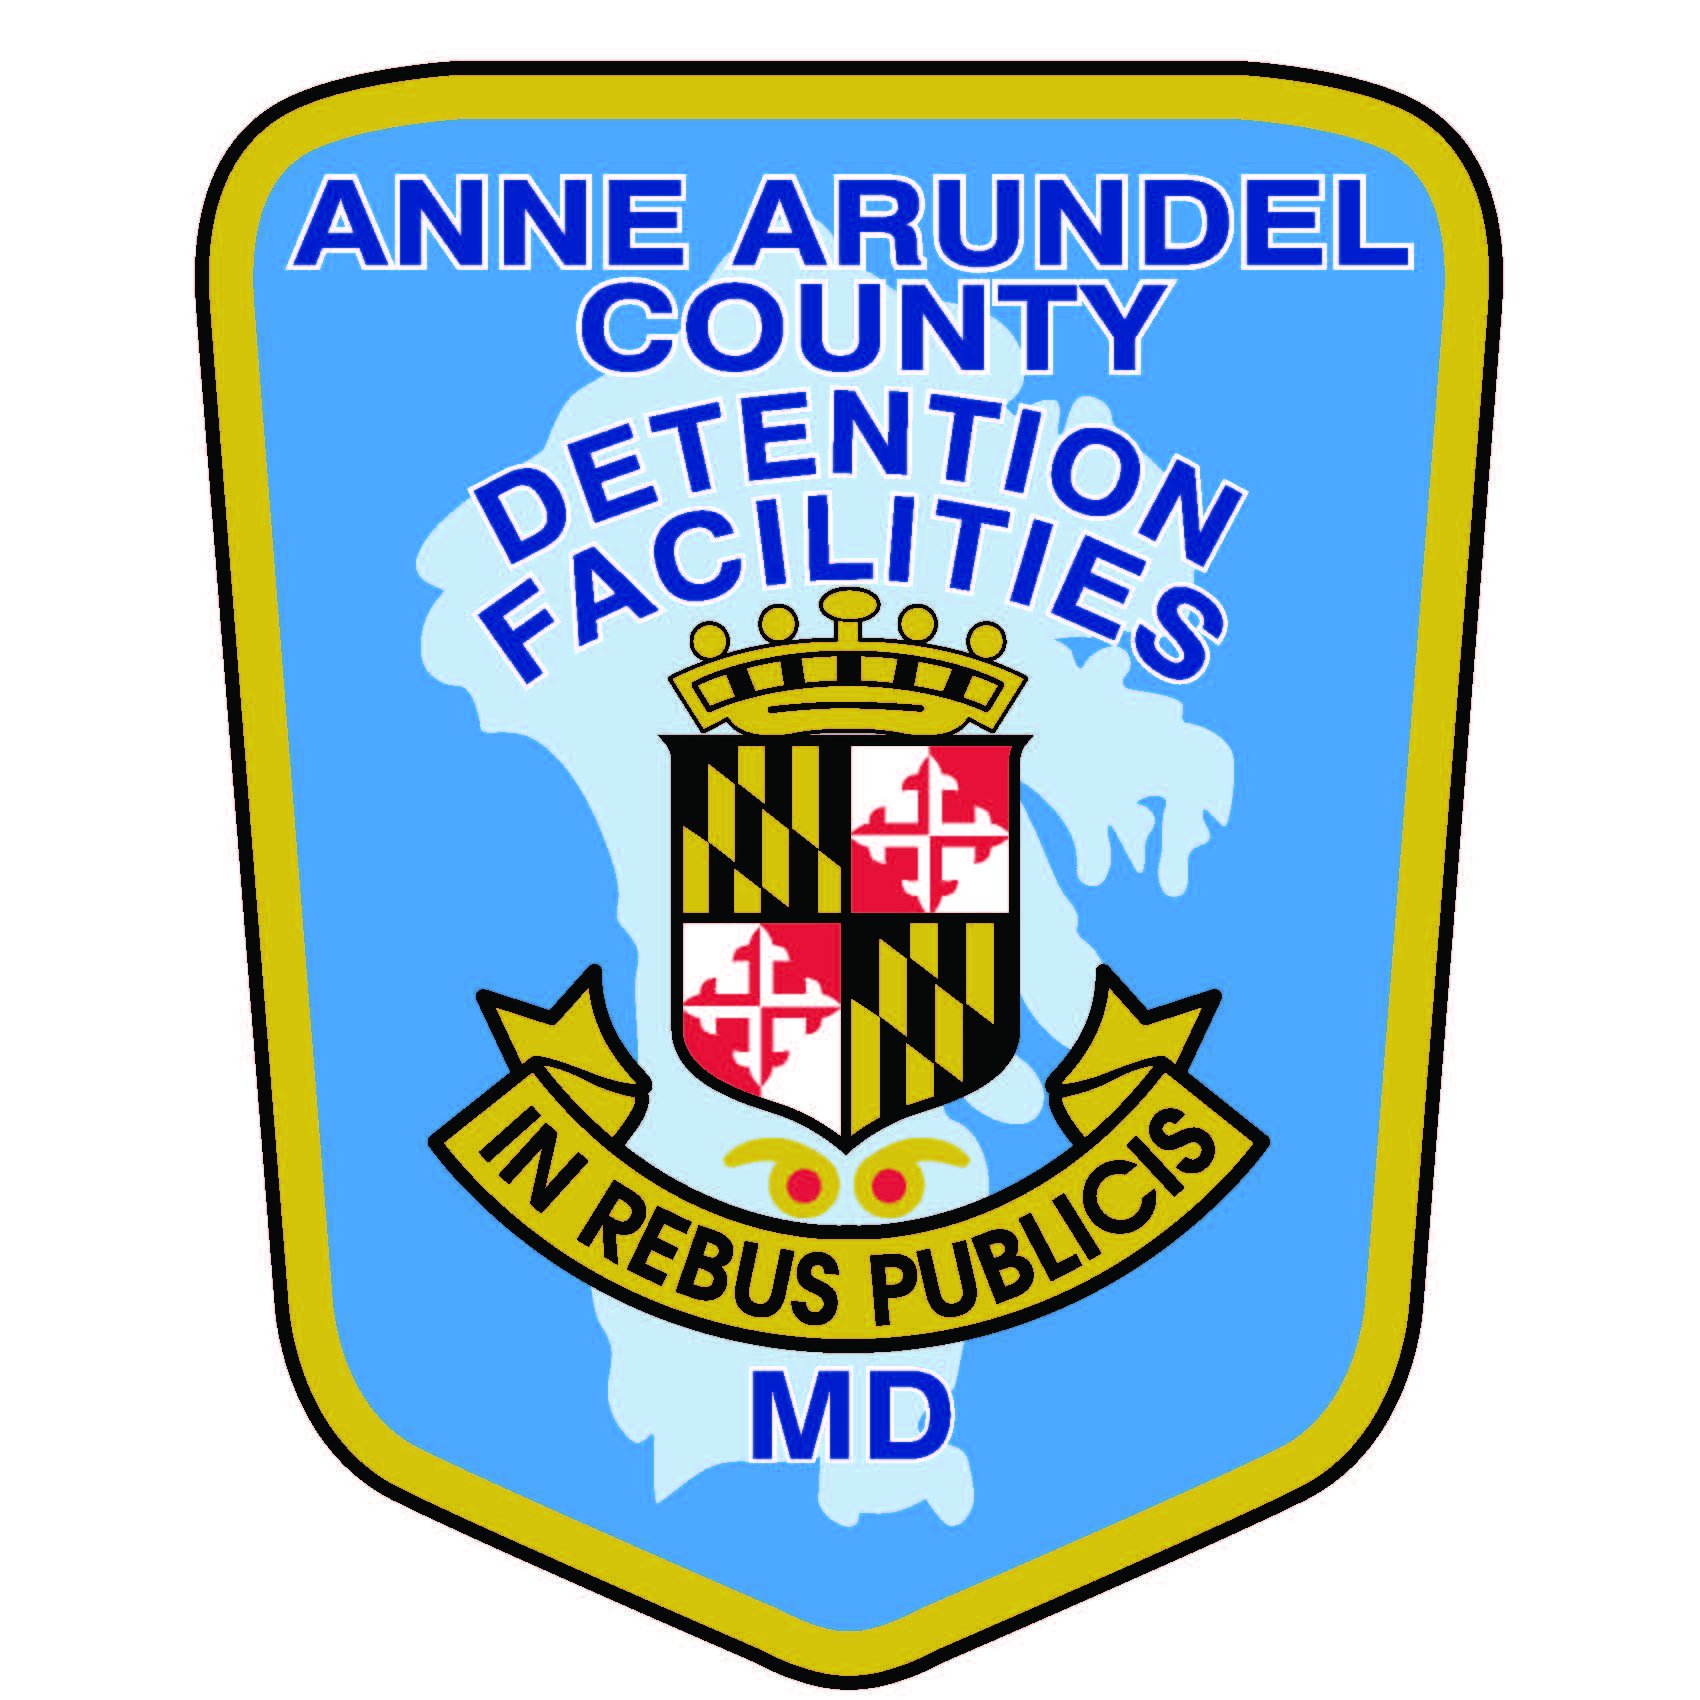 Serving the citizens of Anne Arundel County by professionally managing safe and secure correctional facilities.